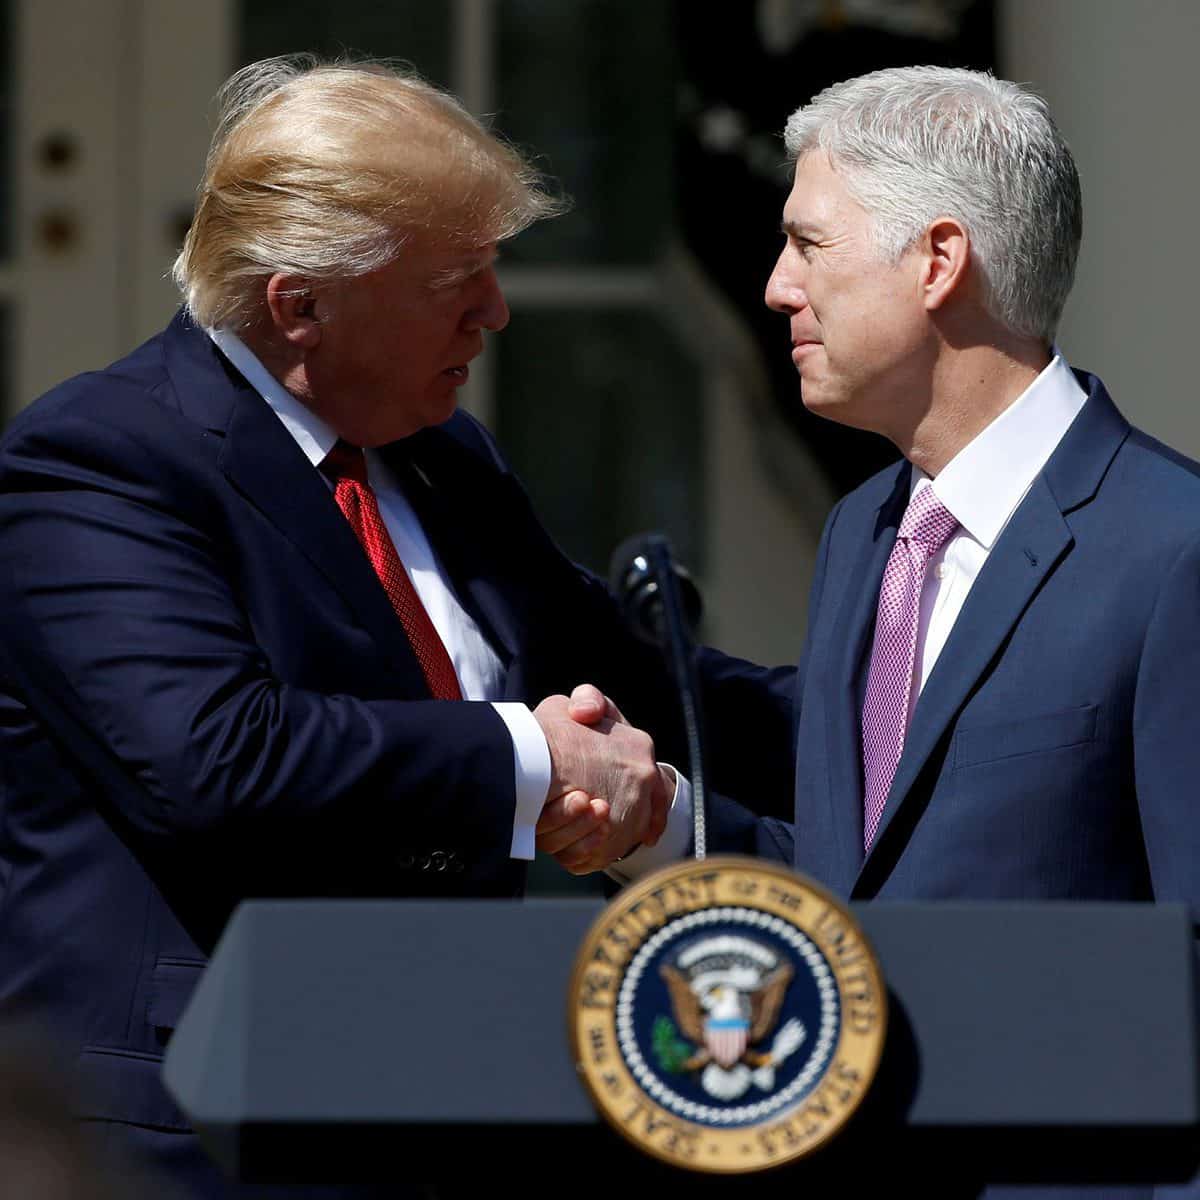 Conservative Supreme Court Justice Corruption Grows As Neil Gorsuch Exposed